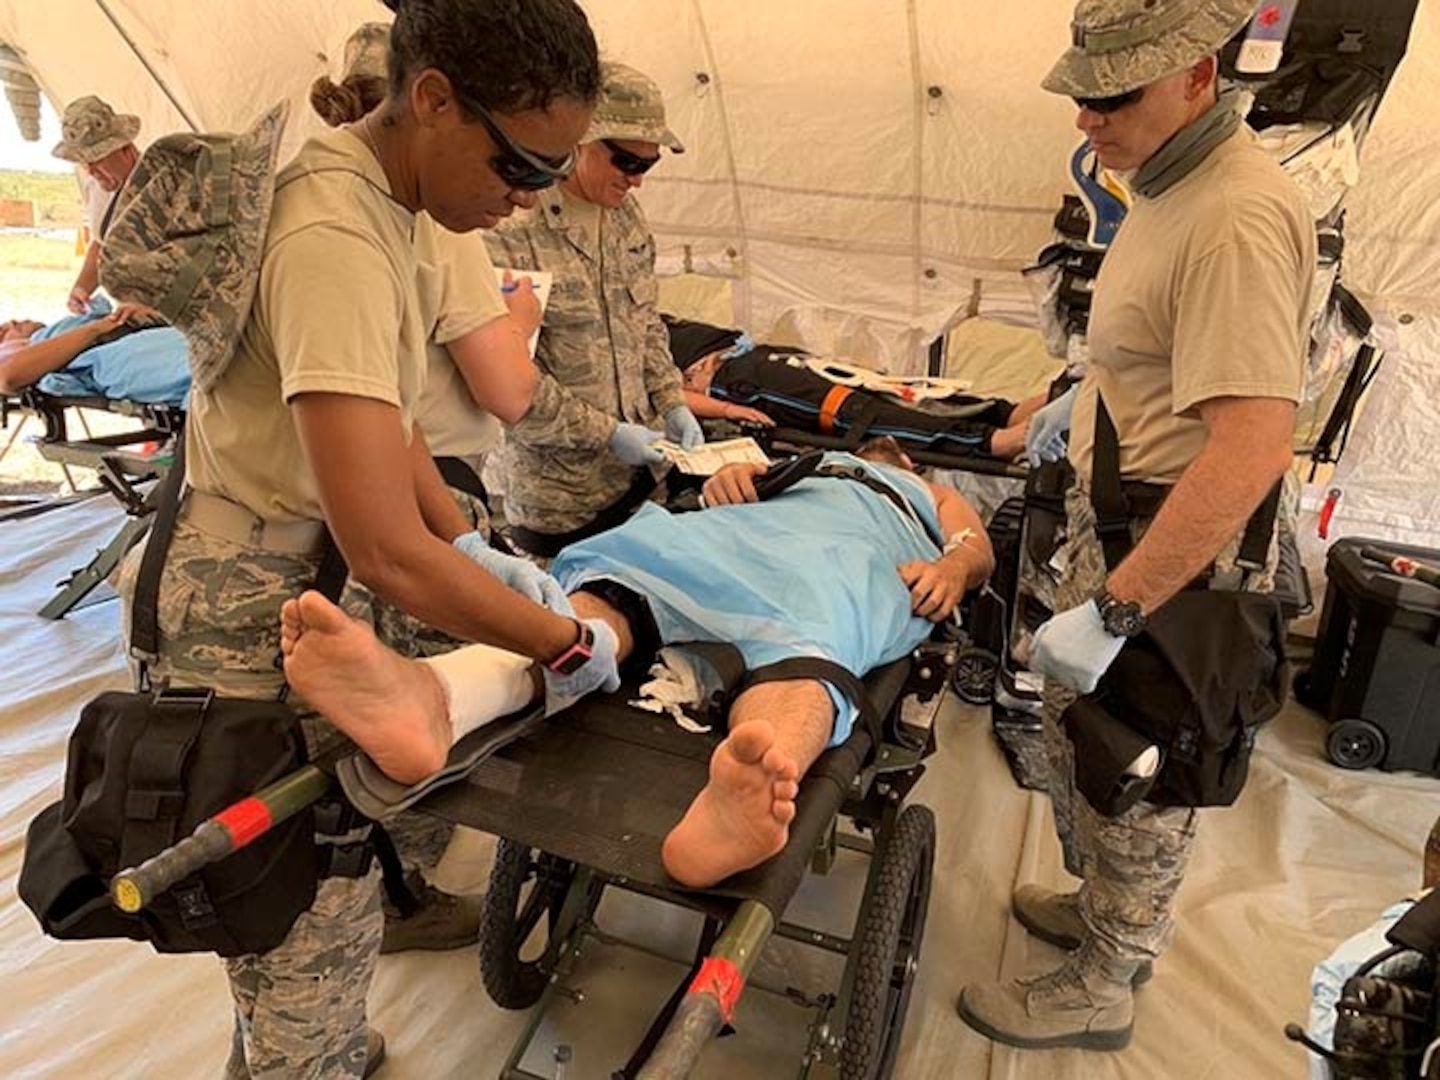 Airmen from the 156th Medical Group treat simulated mass casualties during Exercise Vigilant Guard in Puerto Rico, March 14, 2019. The 156th Airlift Wing transitioned to the 156th Wing April 10 to sync with the unit’s newly assigned contingency response and combat communications missions.